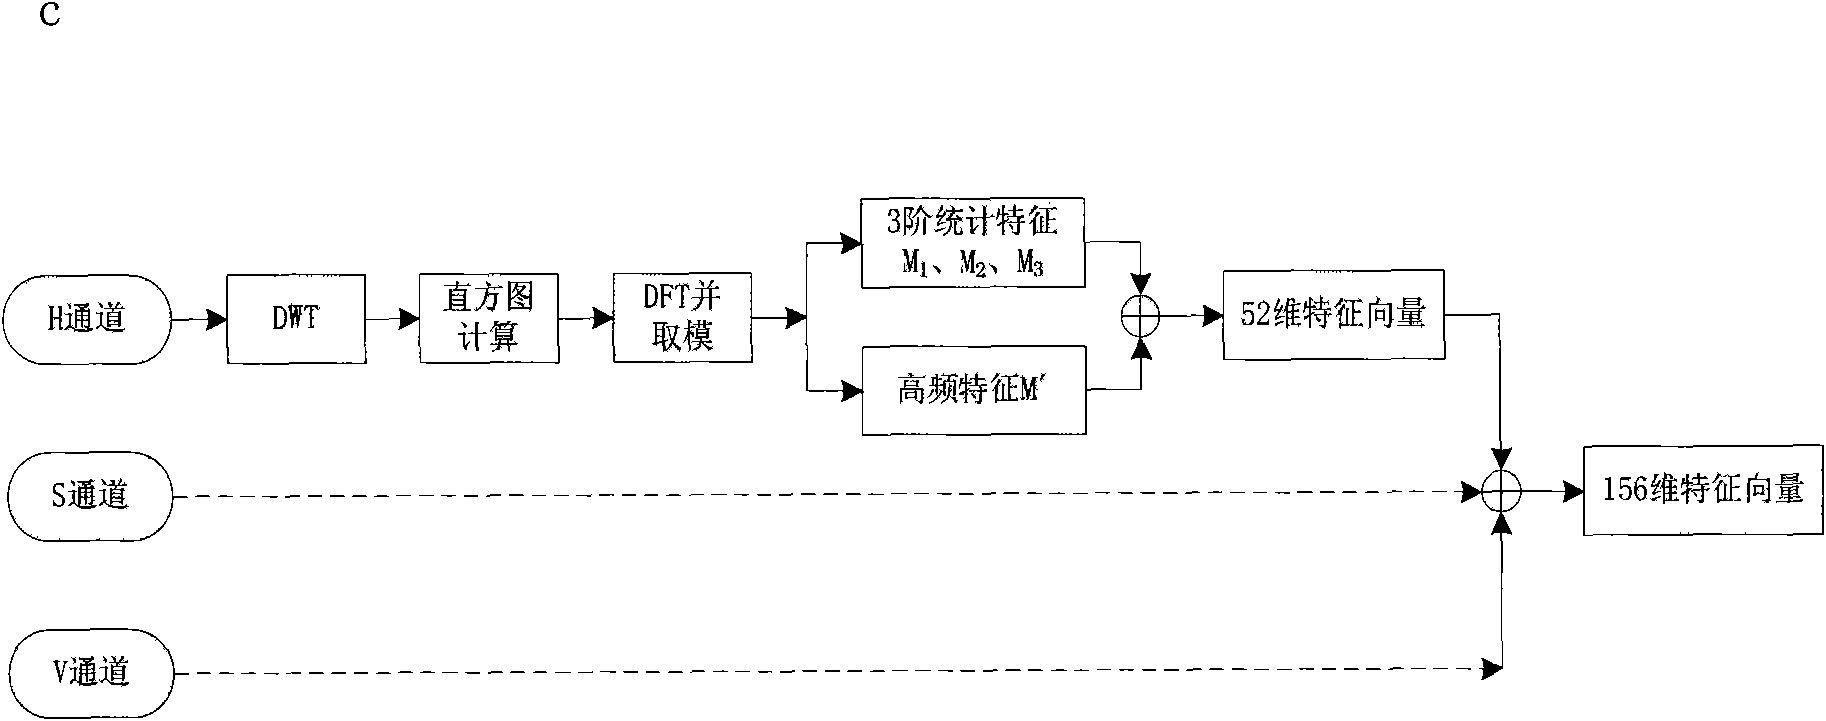 Method for detecting computer generated image and natural image based on wavelet transformation